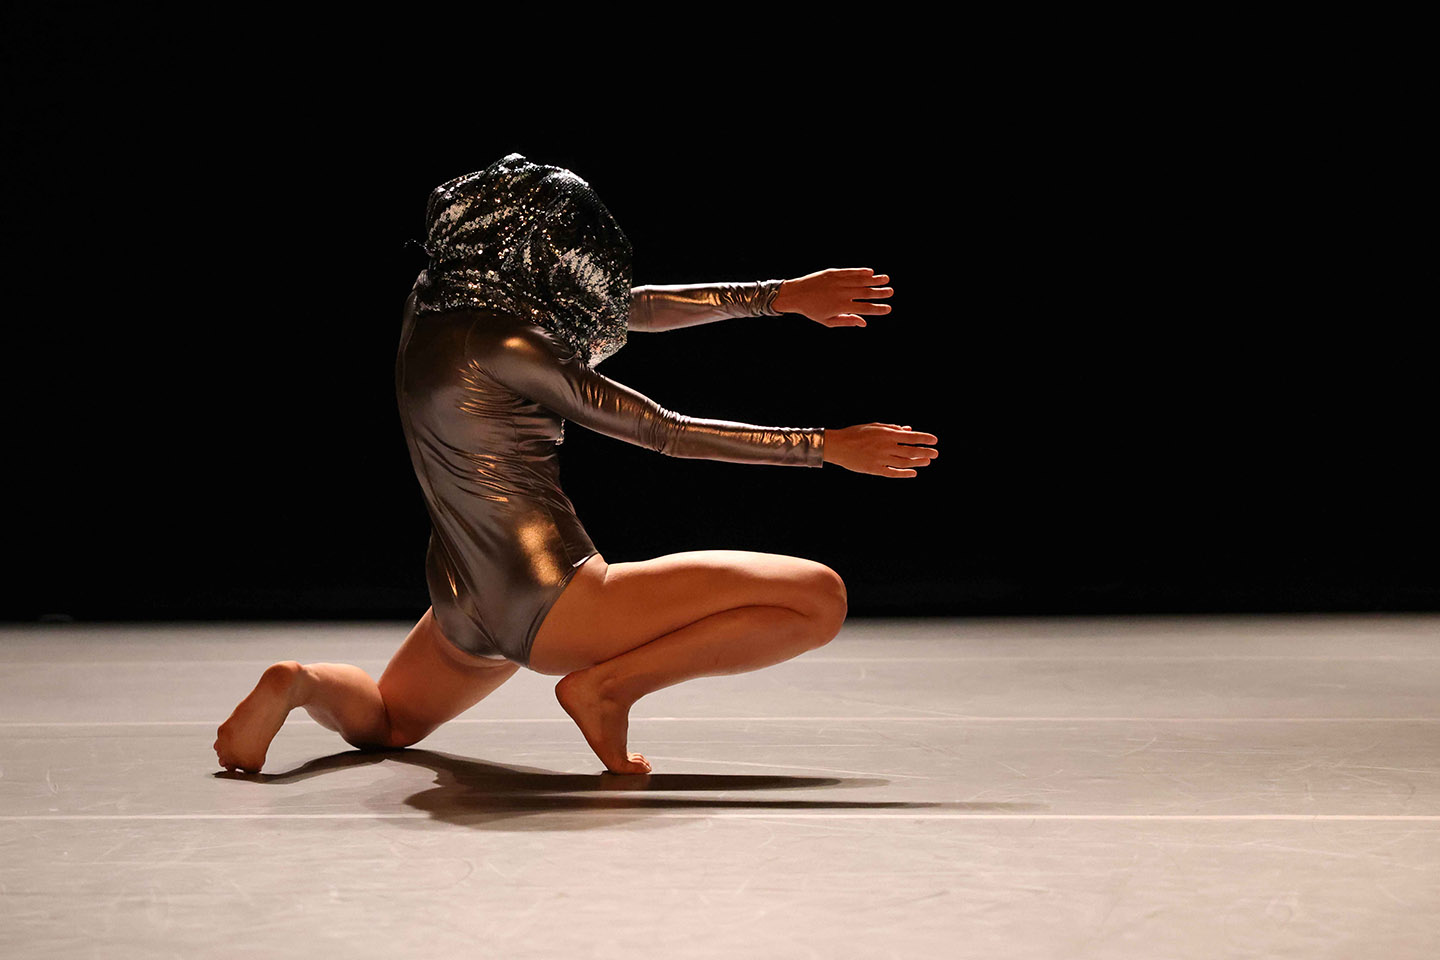 Frieze-like picture of woman in shiny silver leotard crouched on the floor, arms extended in front of her. Covering her whole head is a large bulbous silver mask. The look is mythical/futuristic